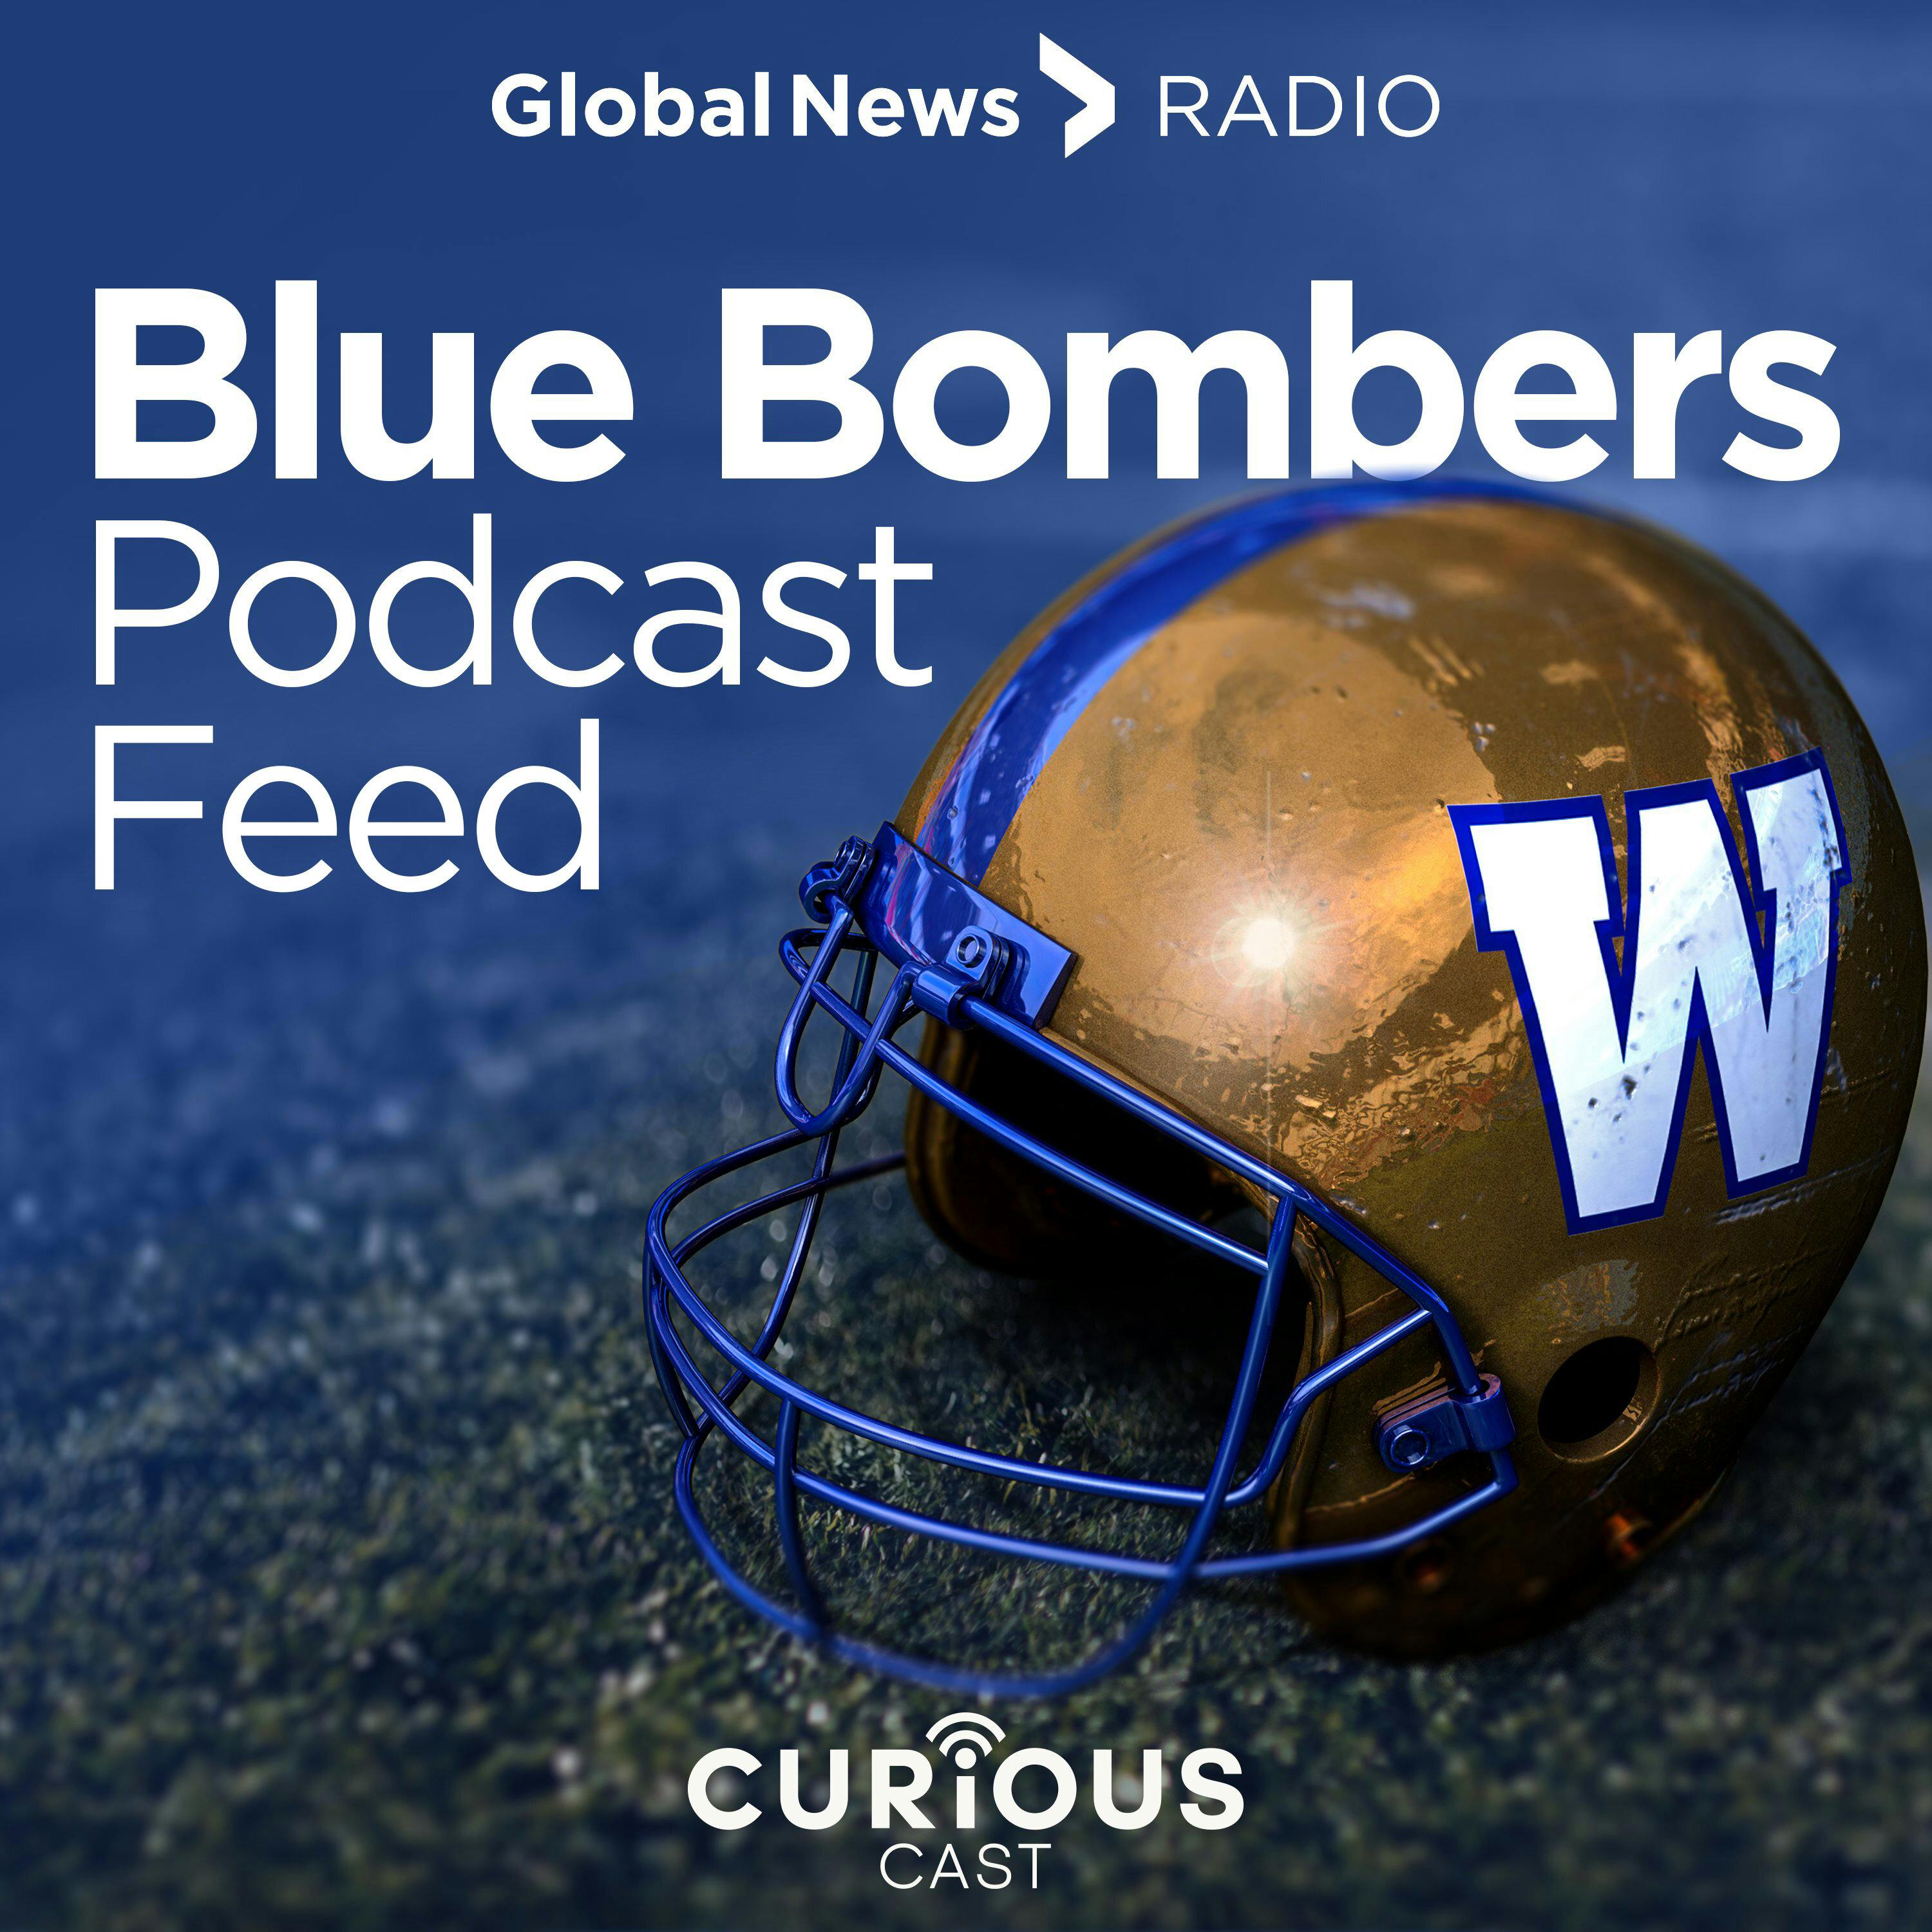 The Blue Bombers Podcast